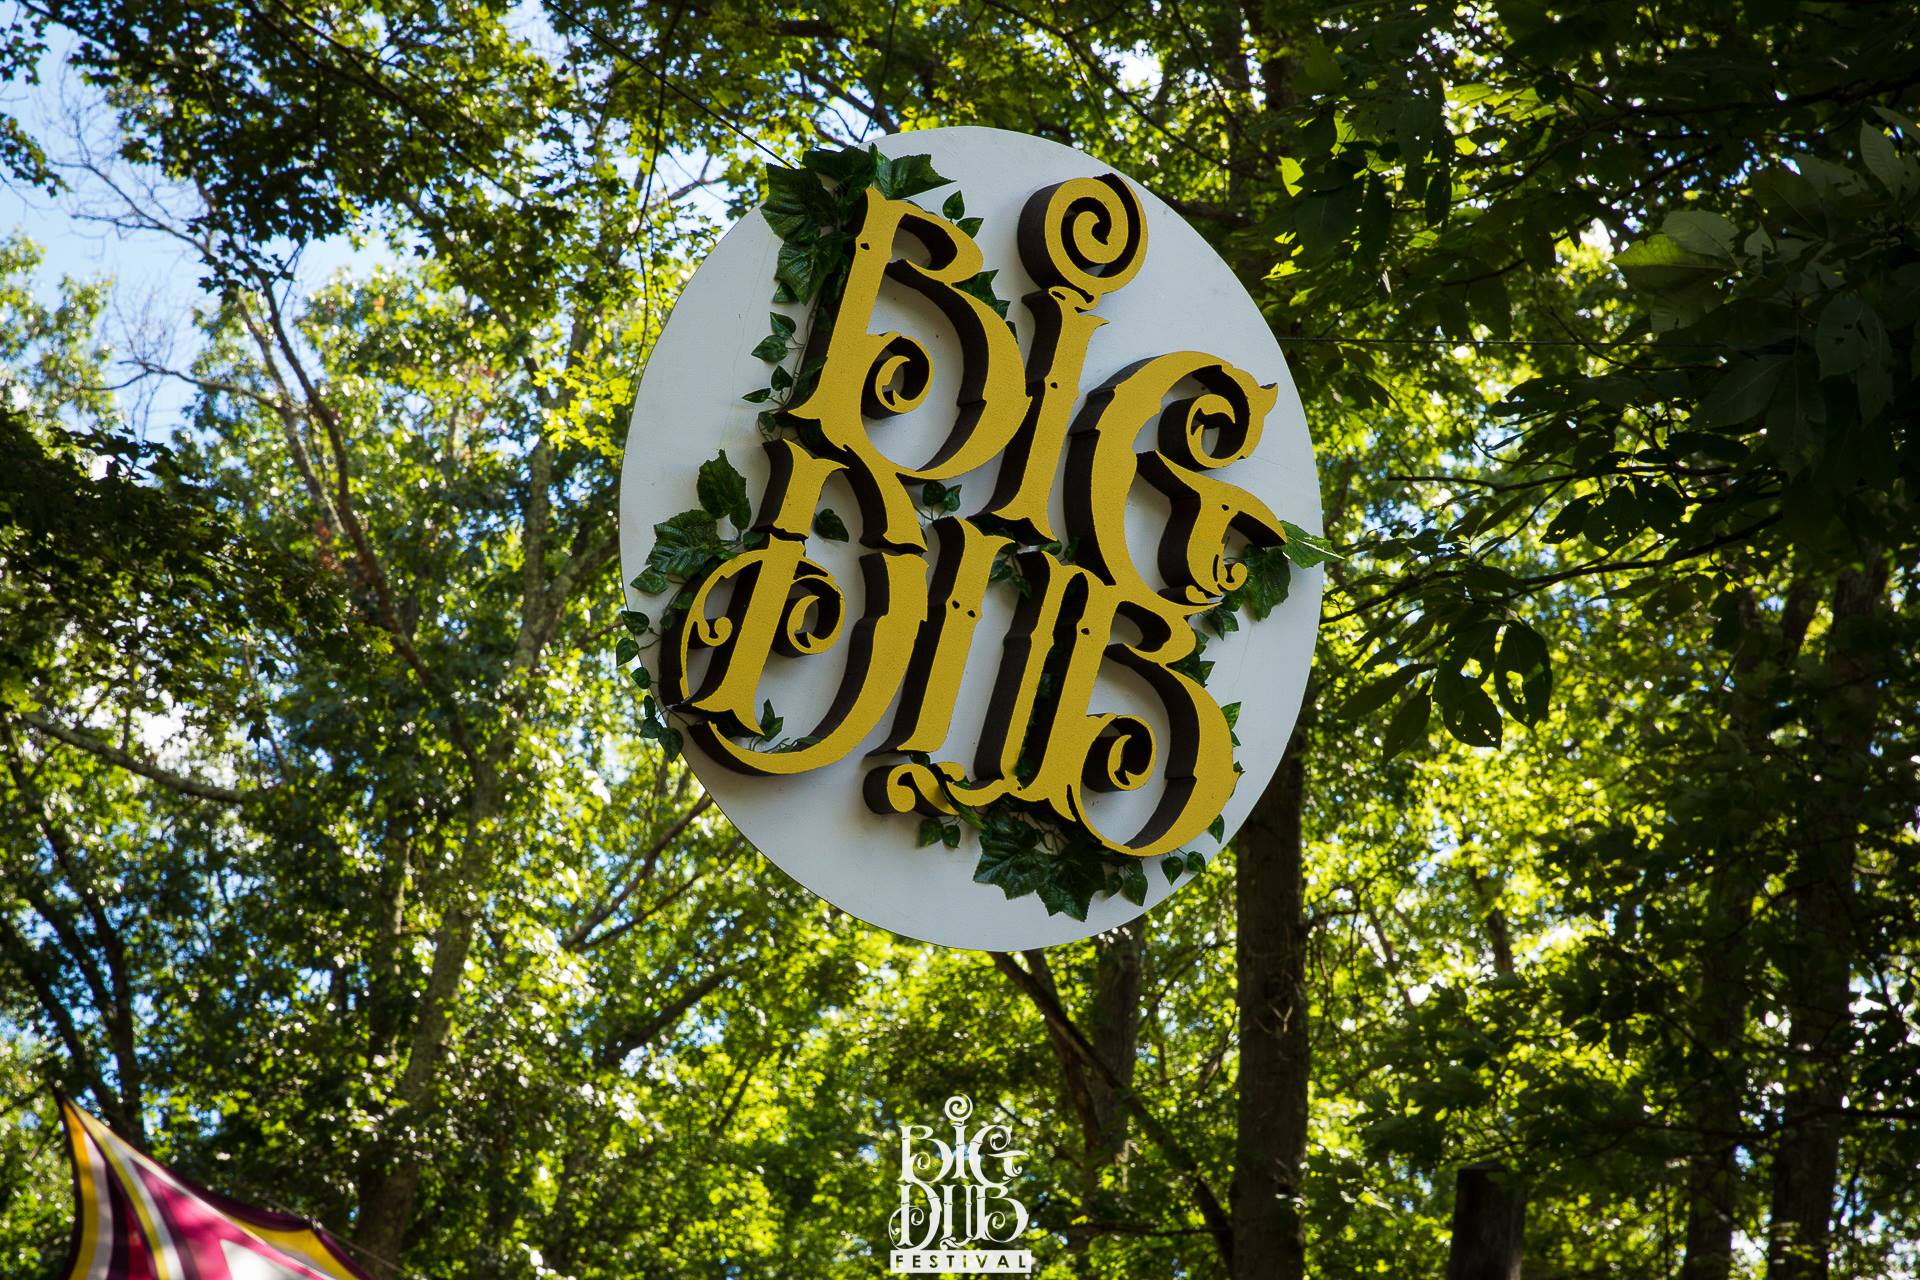 Big Dub Festival All Odds for One of Their Best Years Yet